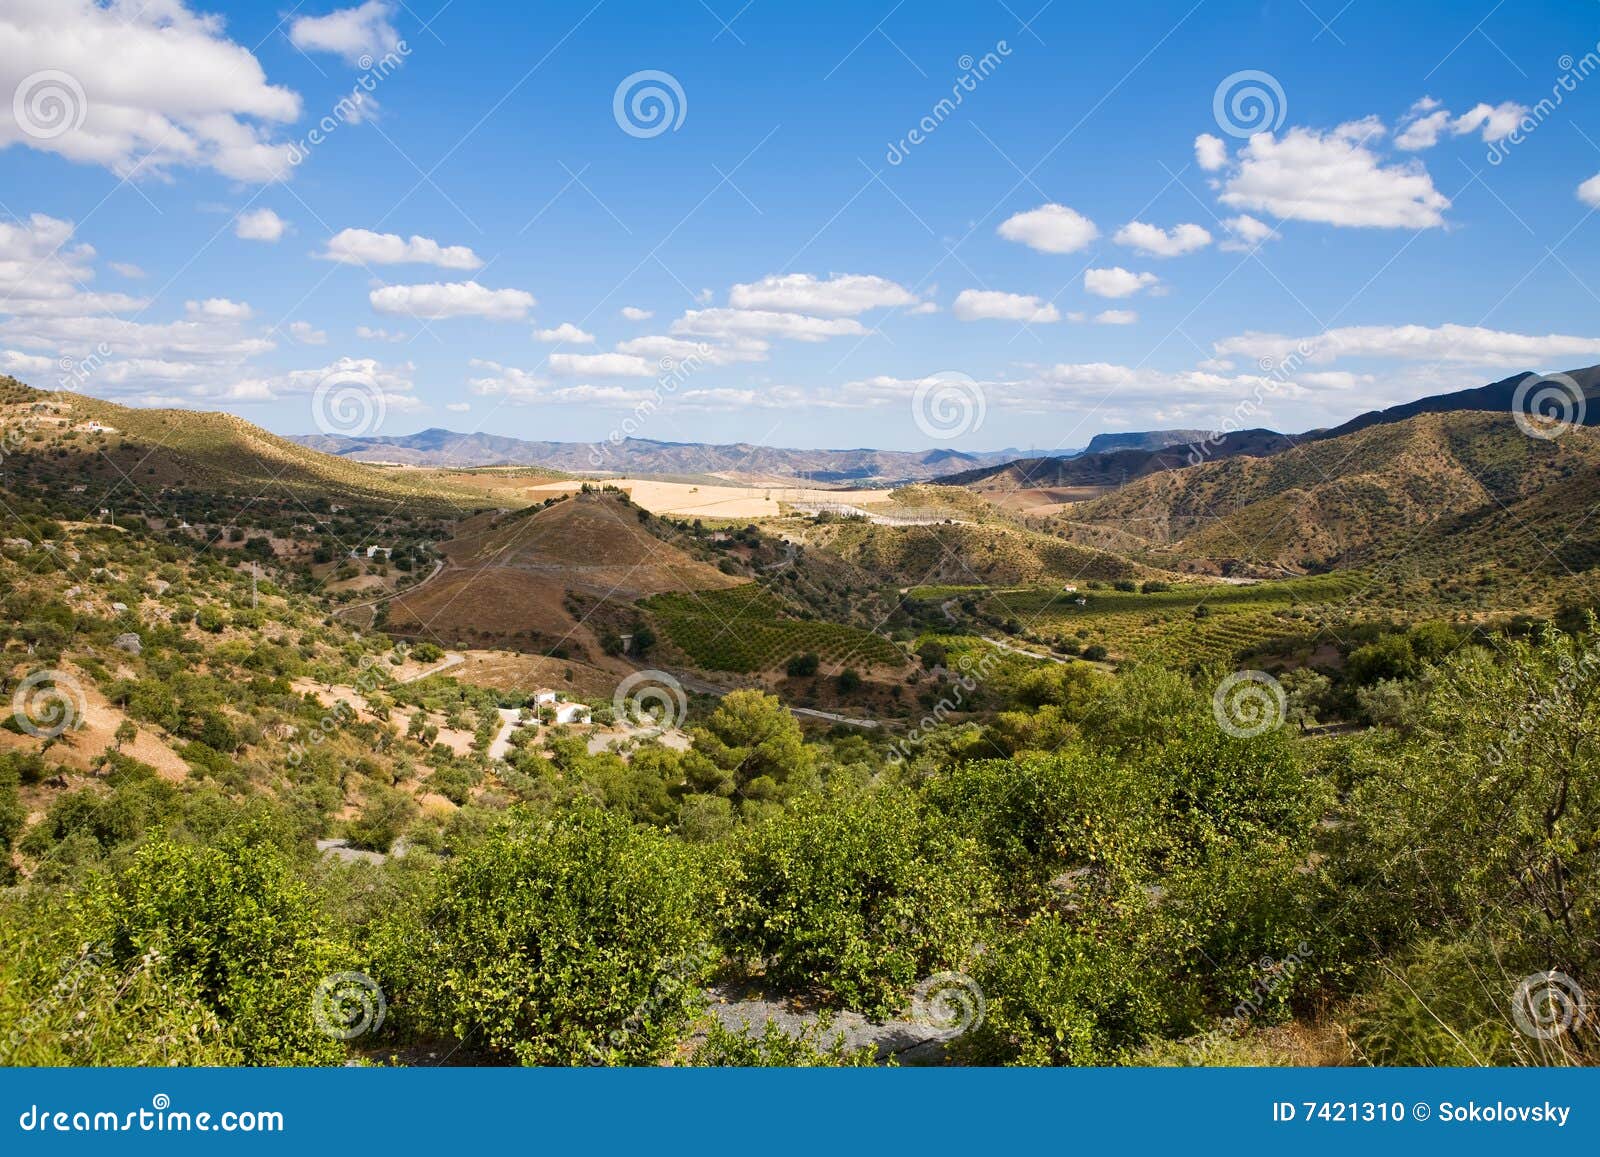 magnificent panorama of surrounding olive groves